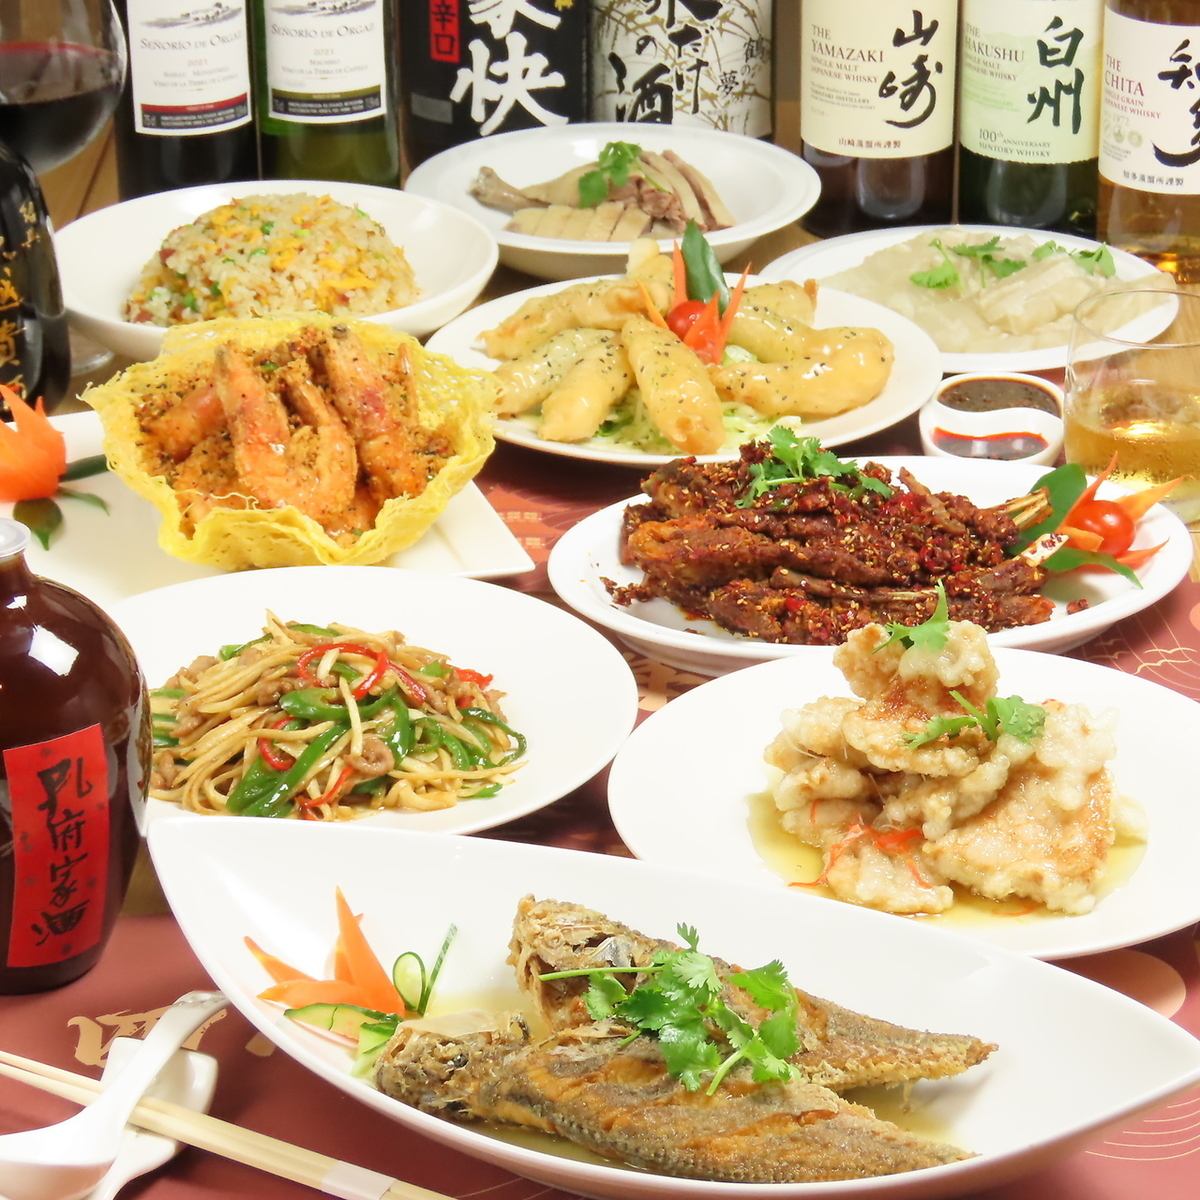 Enjoy authentic, creative Chinese cuisine featuring seafood at an affordable price that anyone can enjoy!